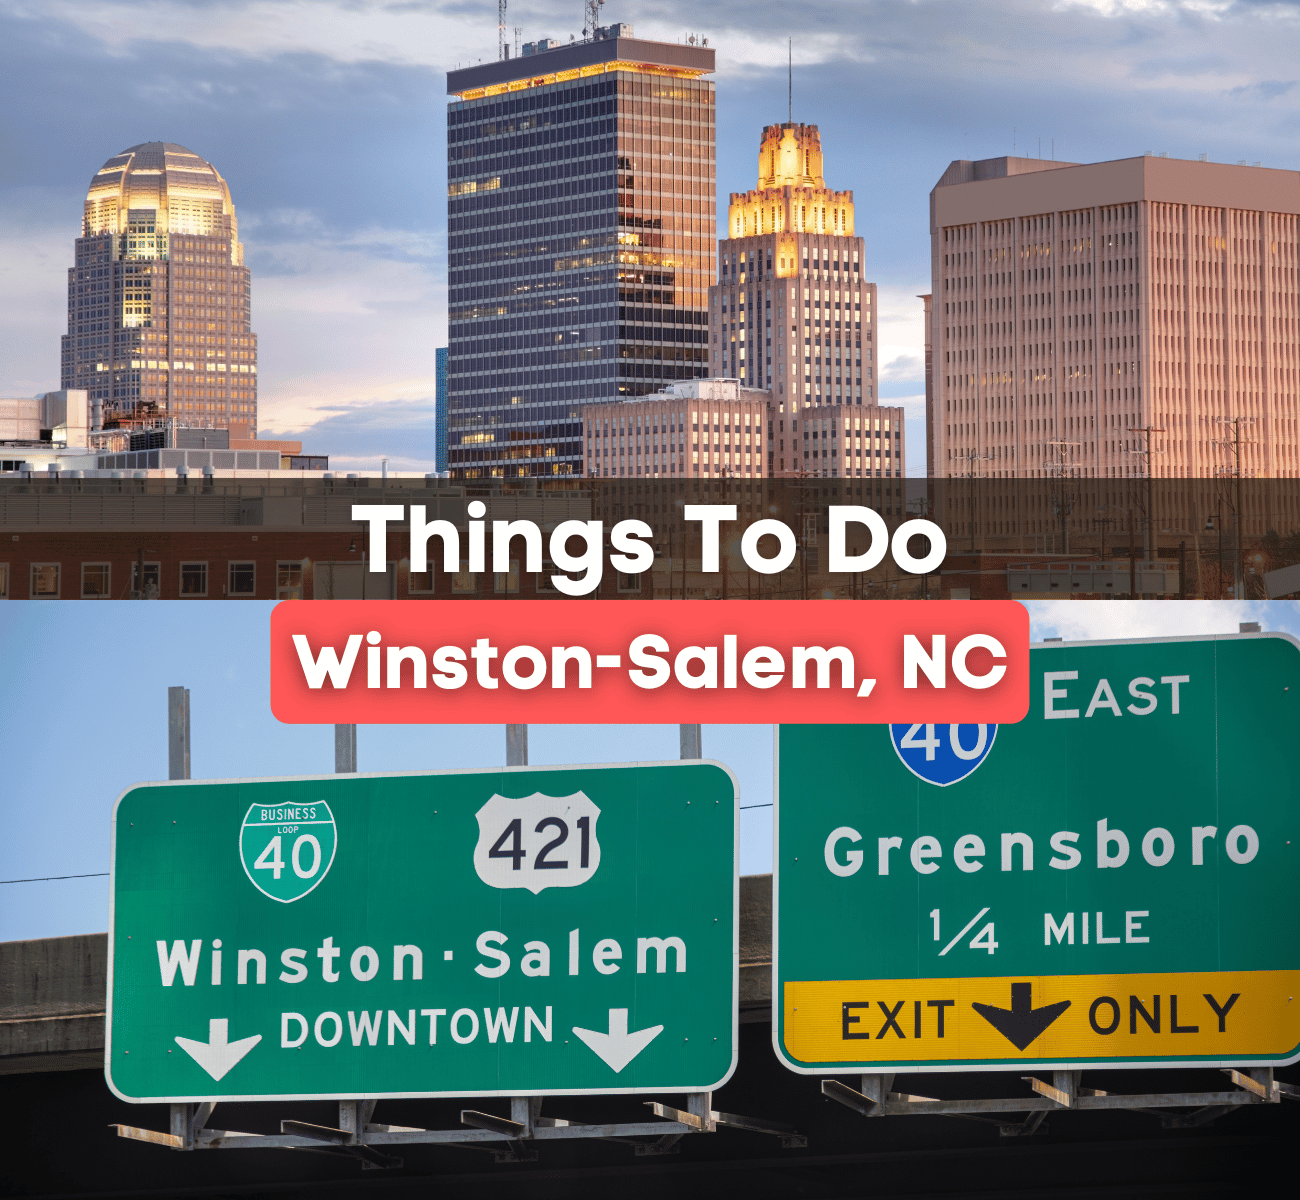 Winston-Salem, NC skyline and road sign - things to do in Winston-Salem, NC